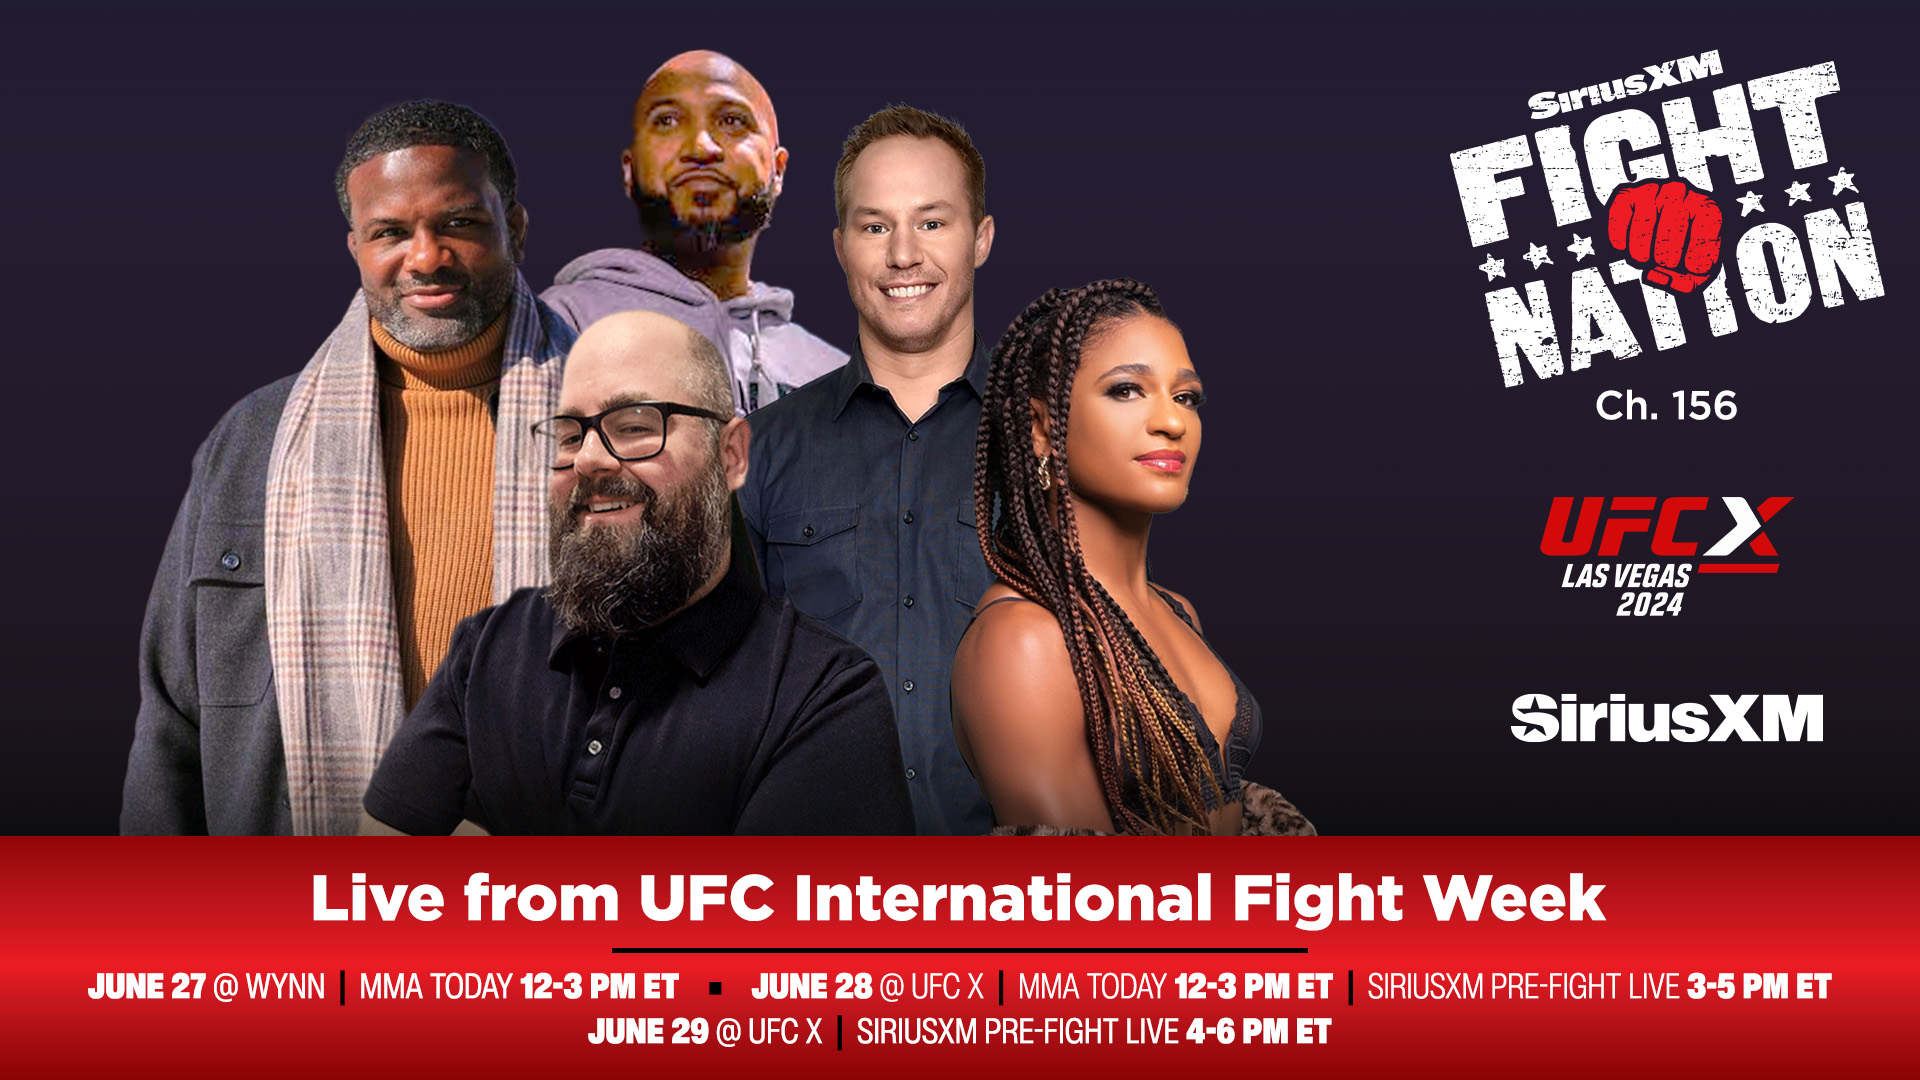 SiriusXM Fight Nation live from UFC International Fight Week